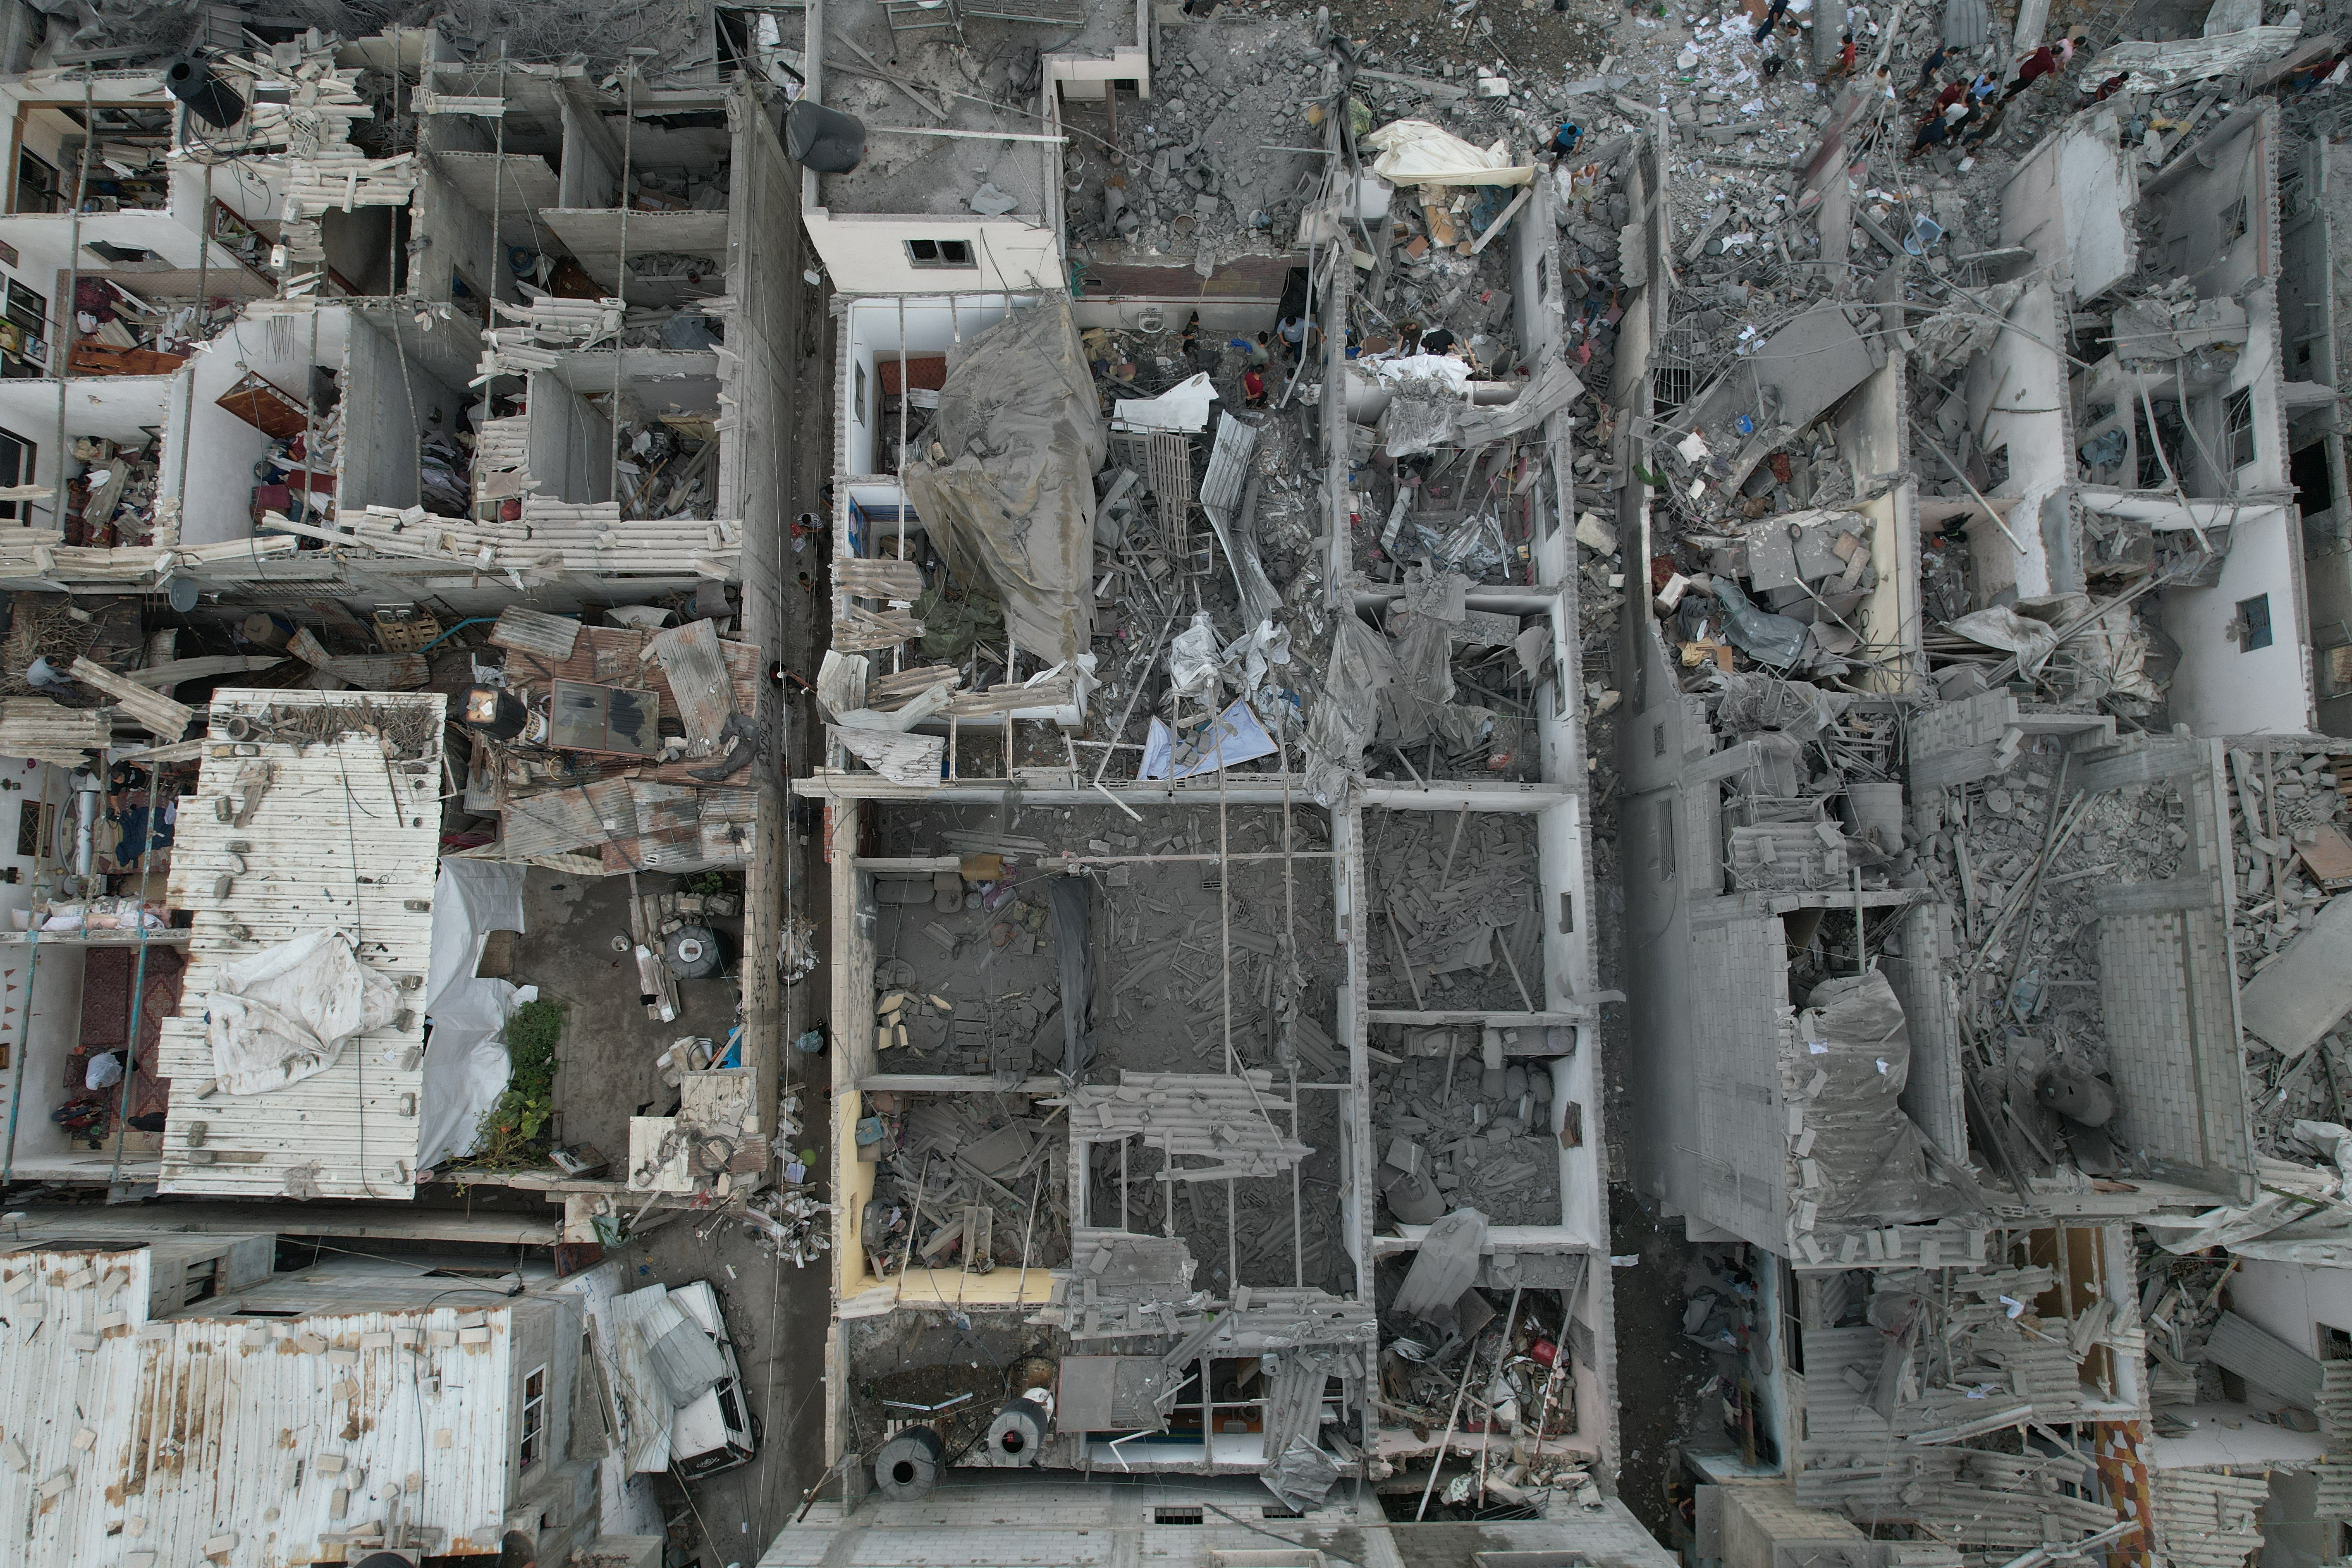 A view of the remains of a mosque and houses destroyed by Israeli strikes in the central Gaza Strip